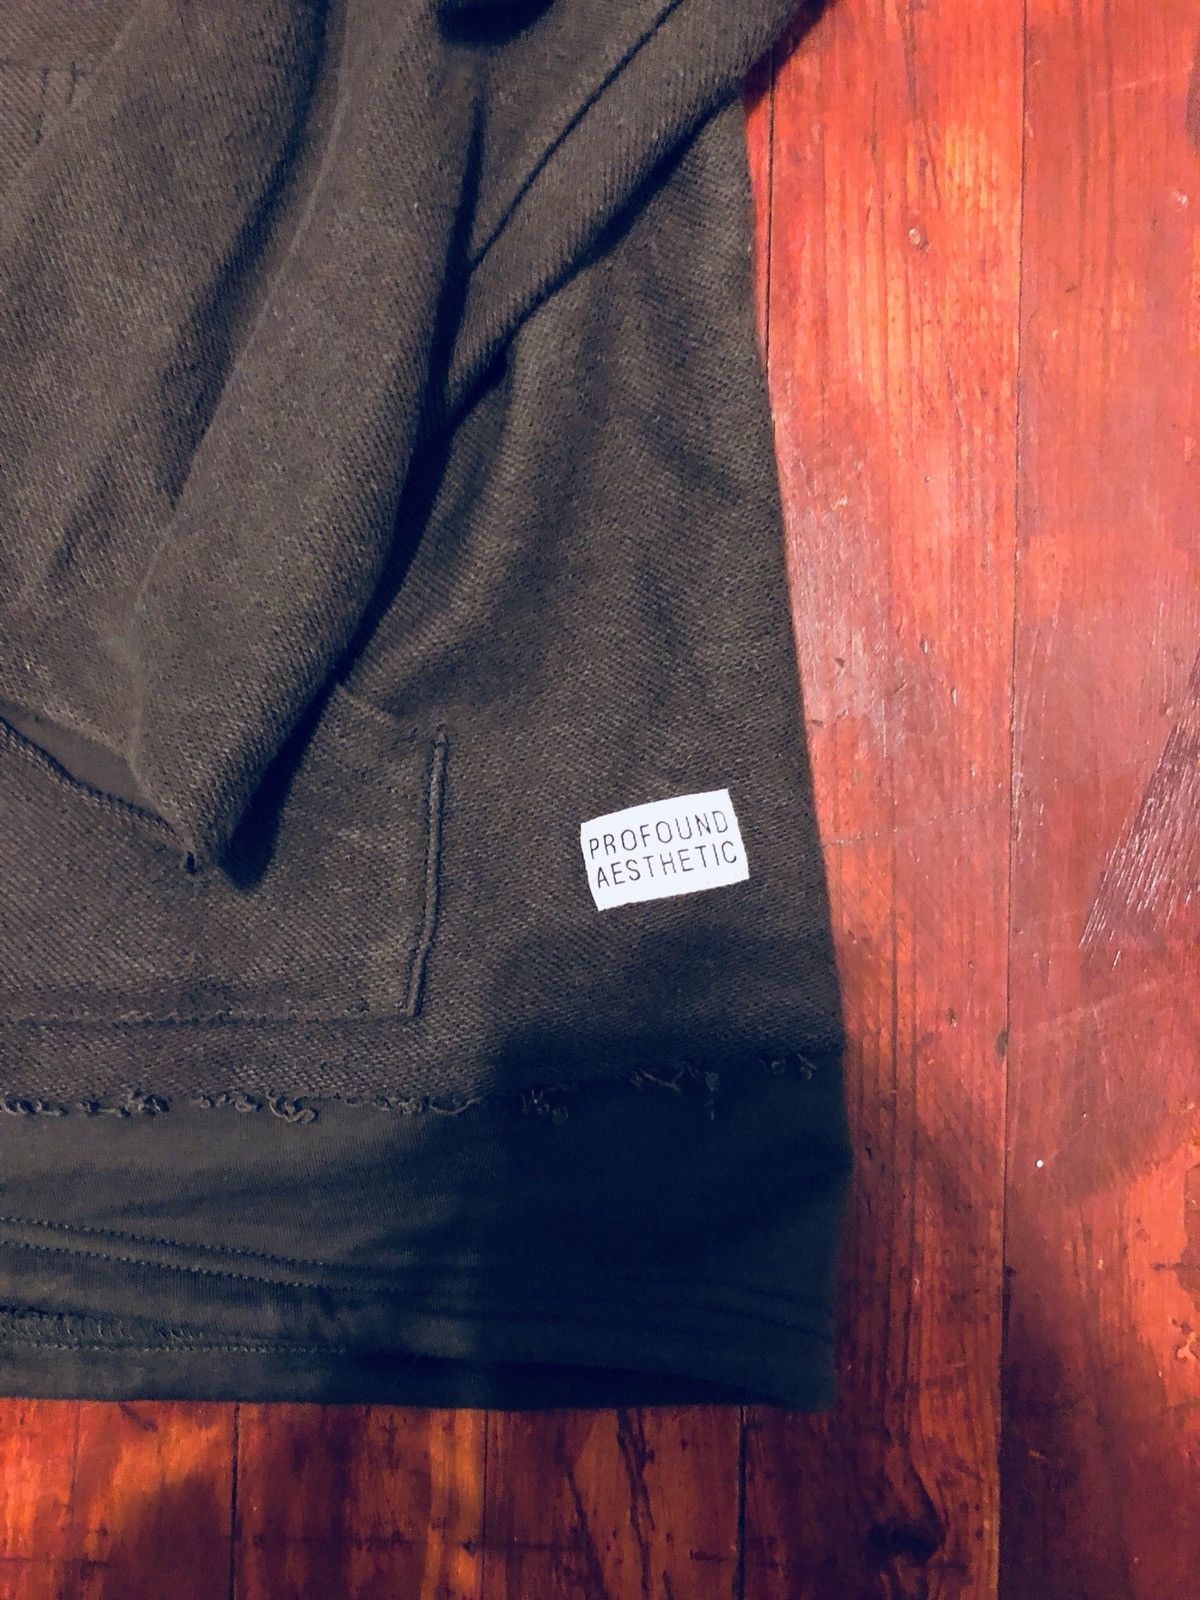 Profound Aesthetic DOUBLE LAYER REVERSED FRENCH TERRY HOODIE IN DARK OLIVE Size US L / EU 52-54 / 3 - 3 Thumbnail